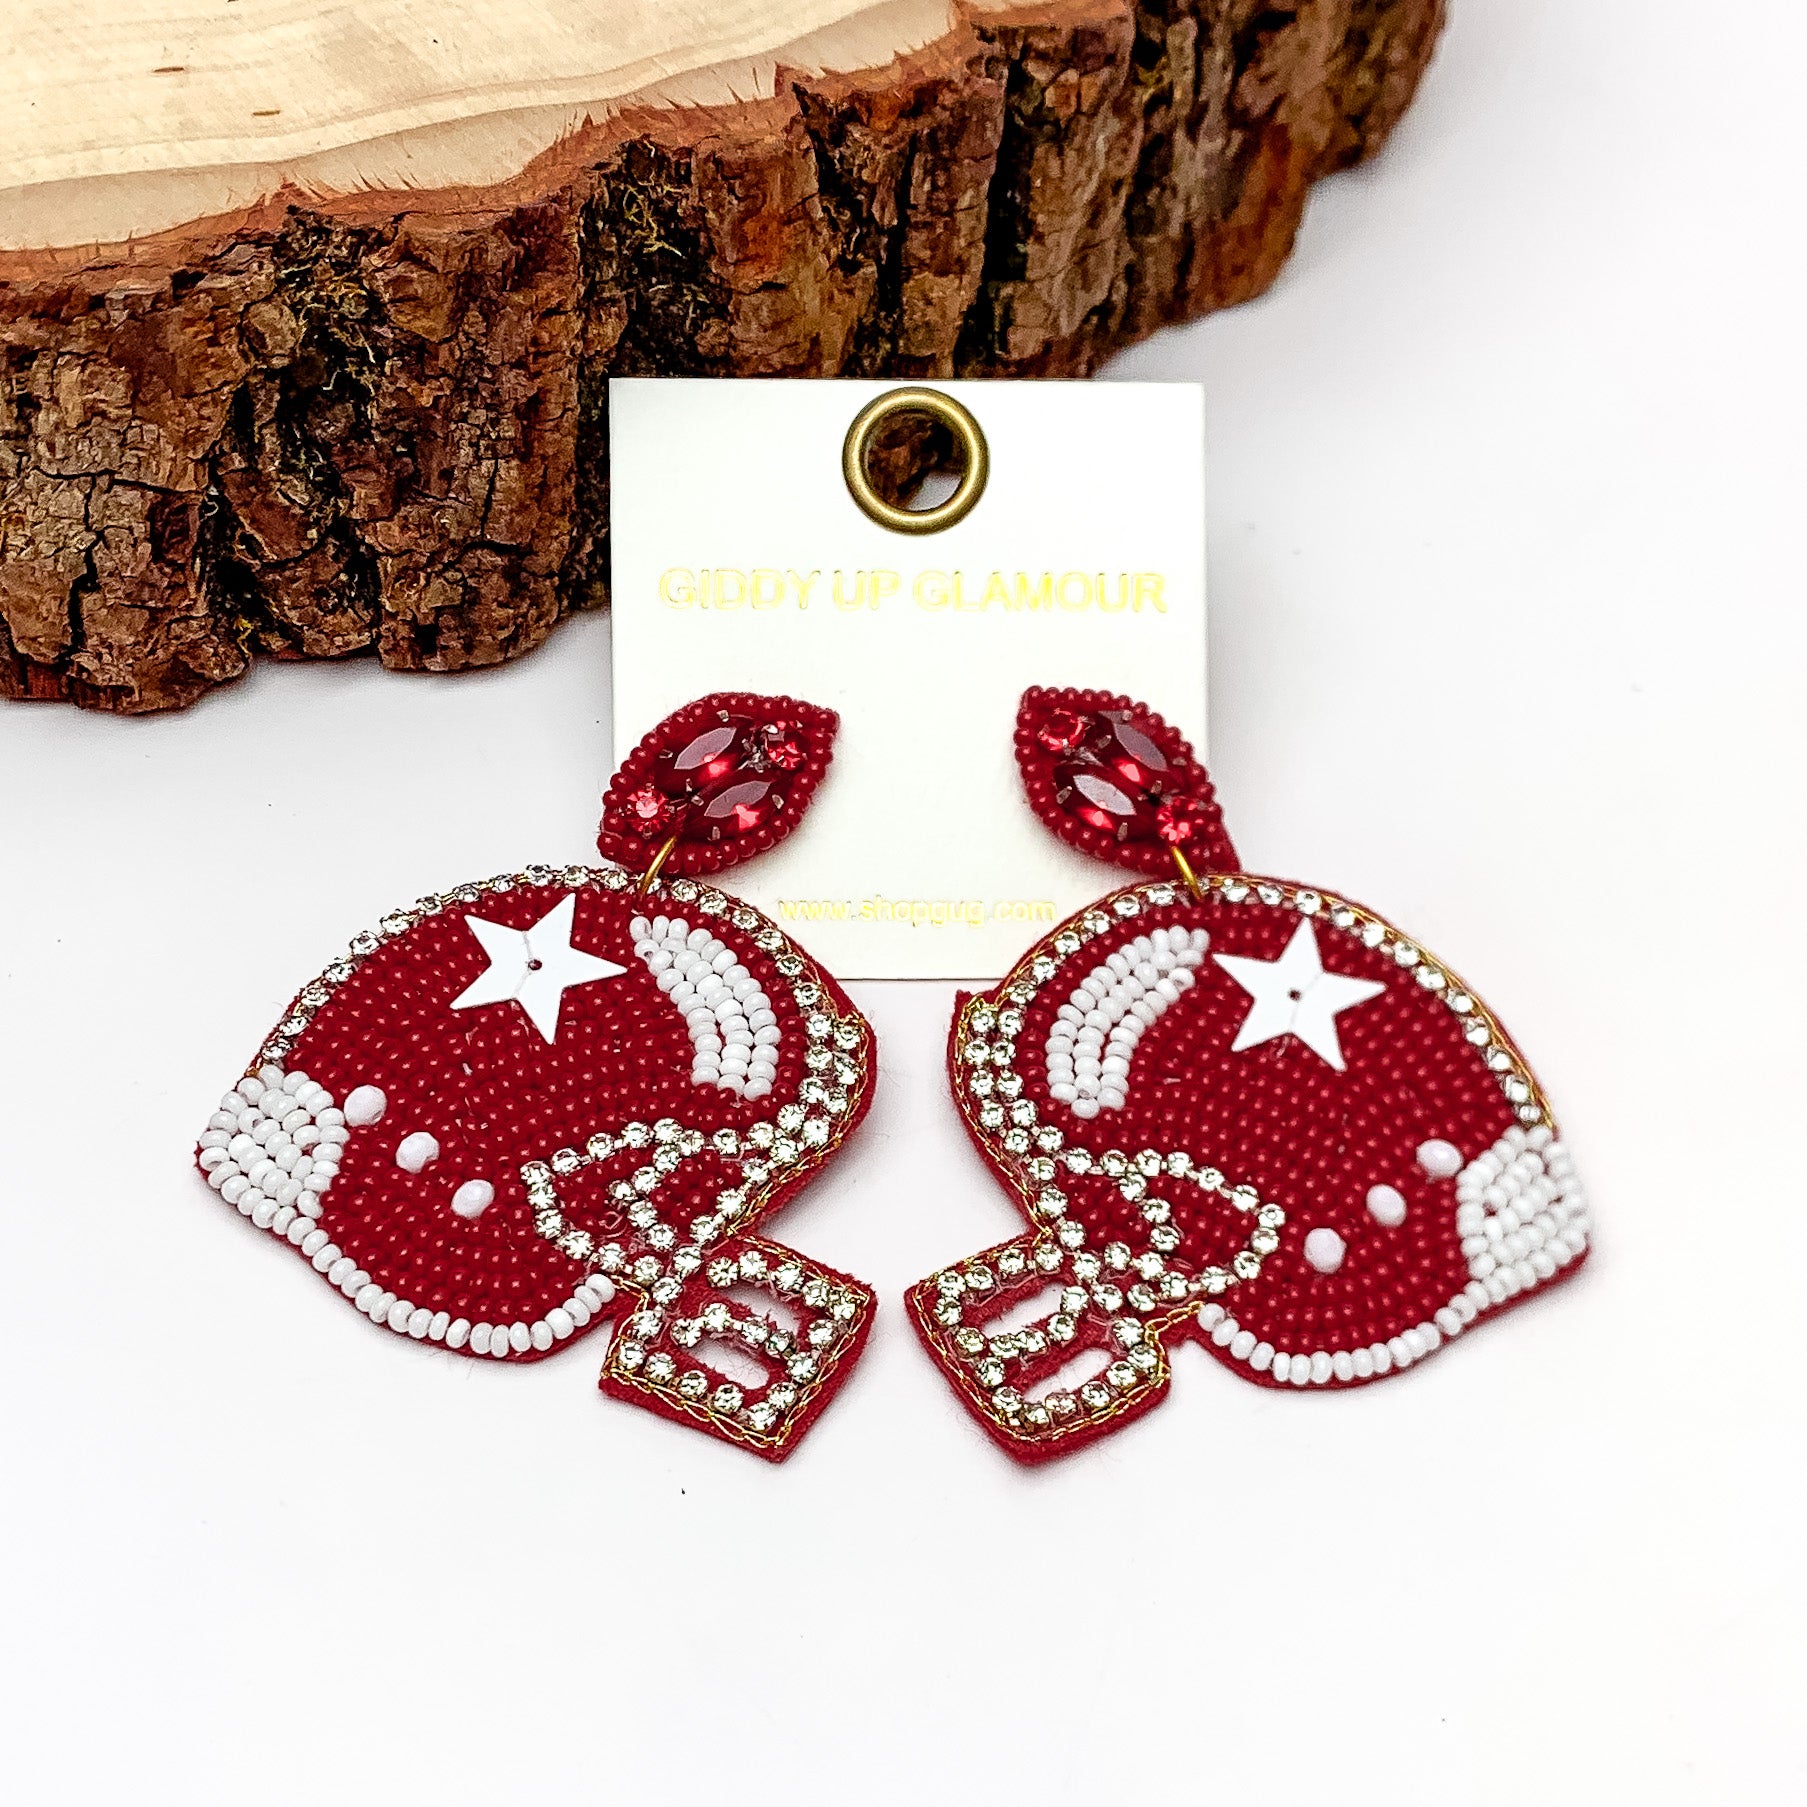 Beaded Football Helmet Earrings with a Clear Crystal Outline in Maroon - Giddy Up Glamour Boutique